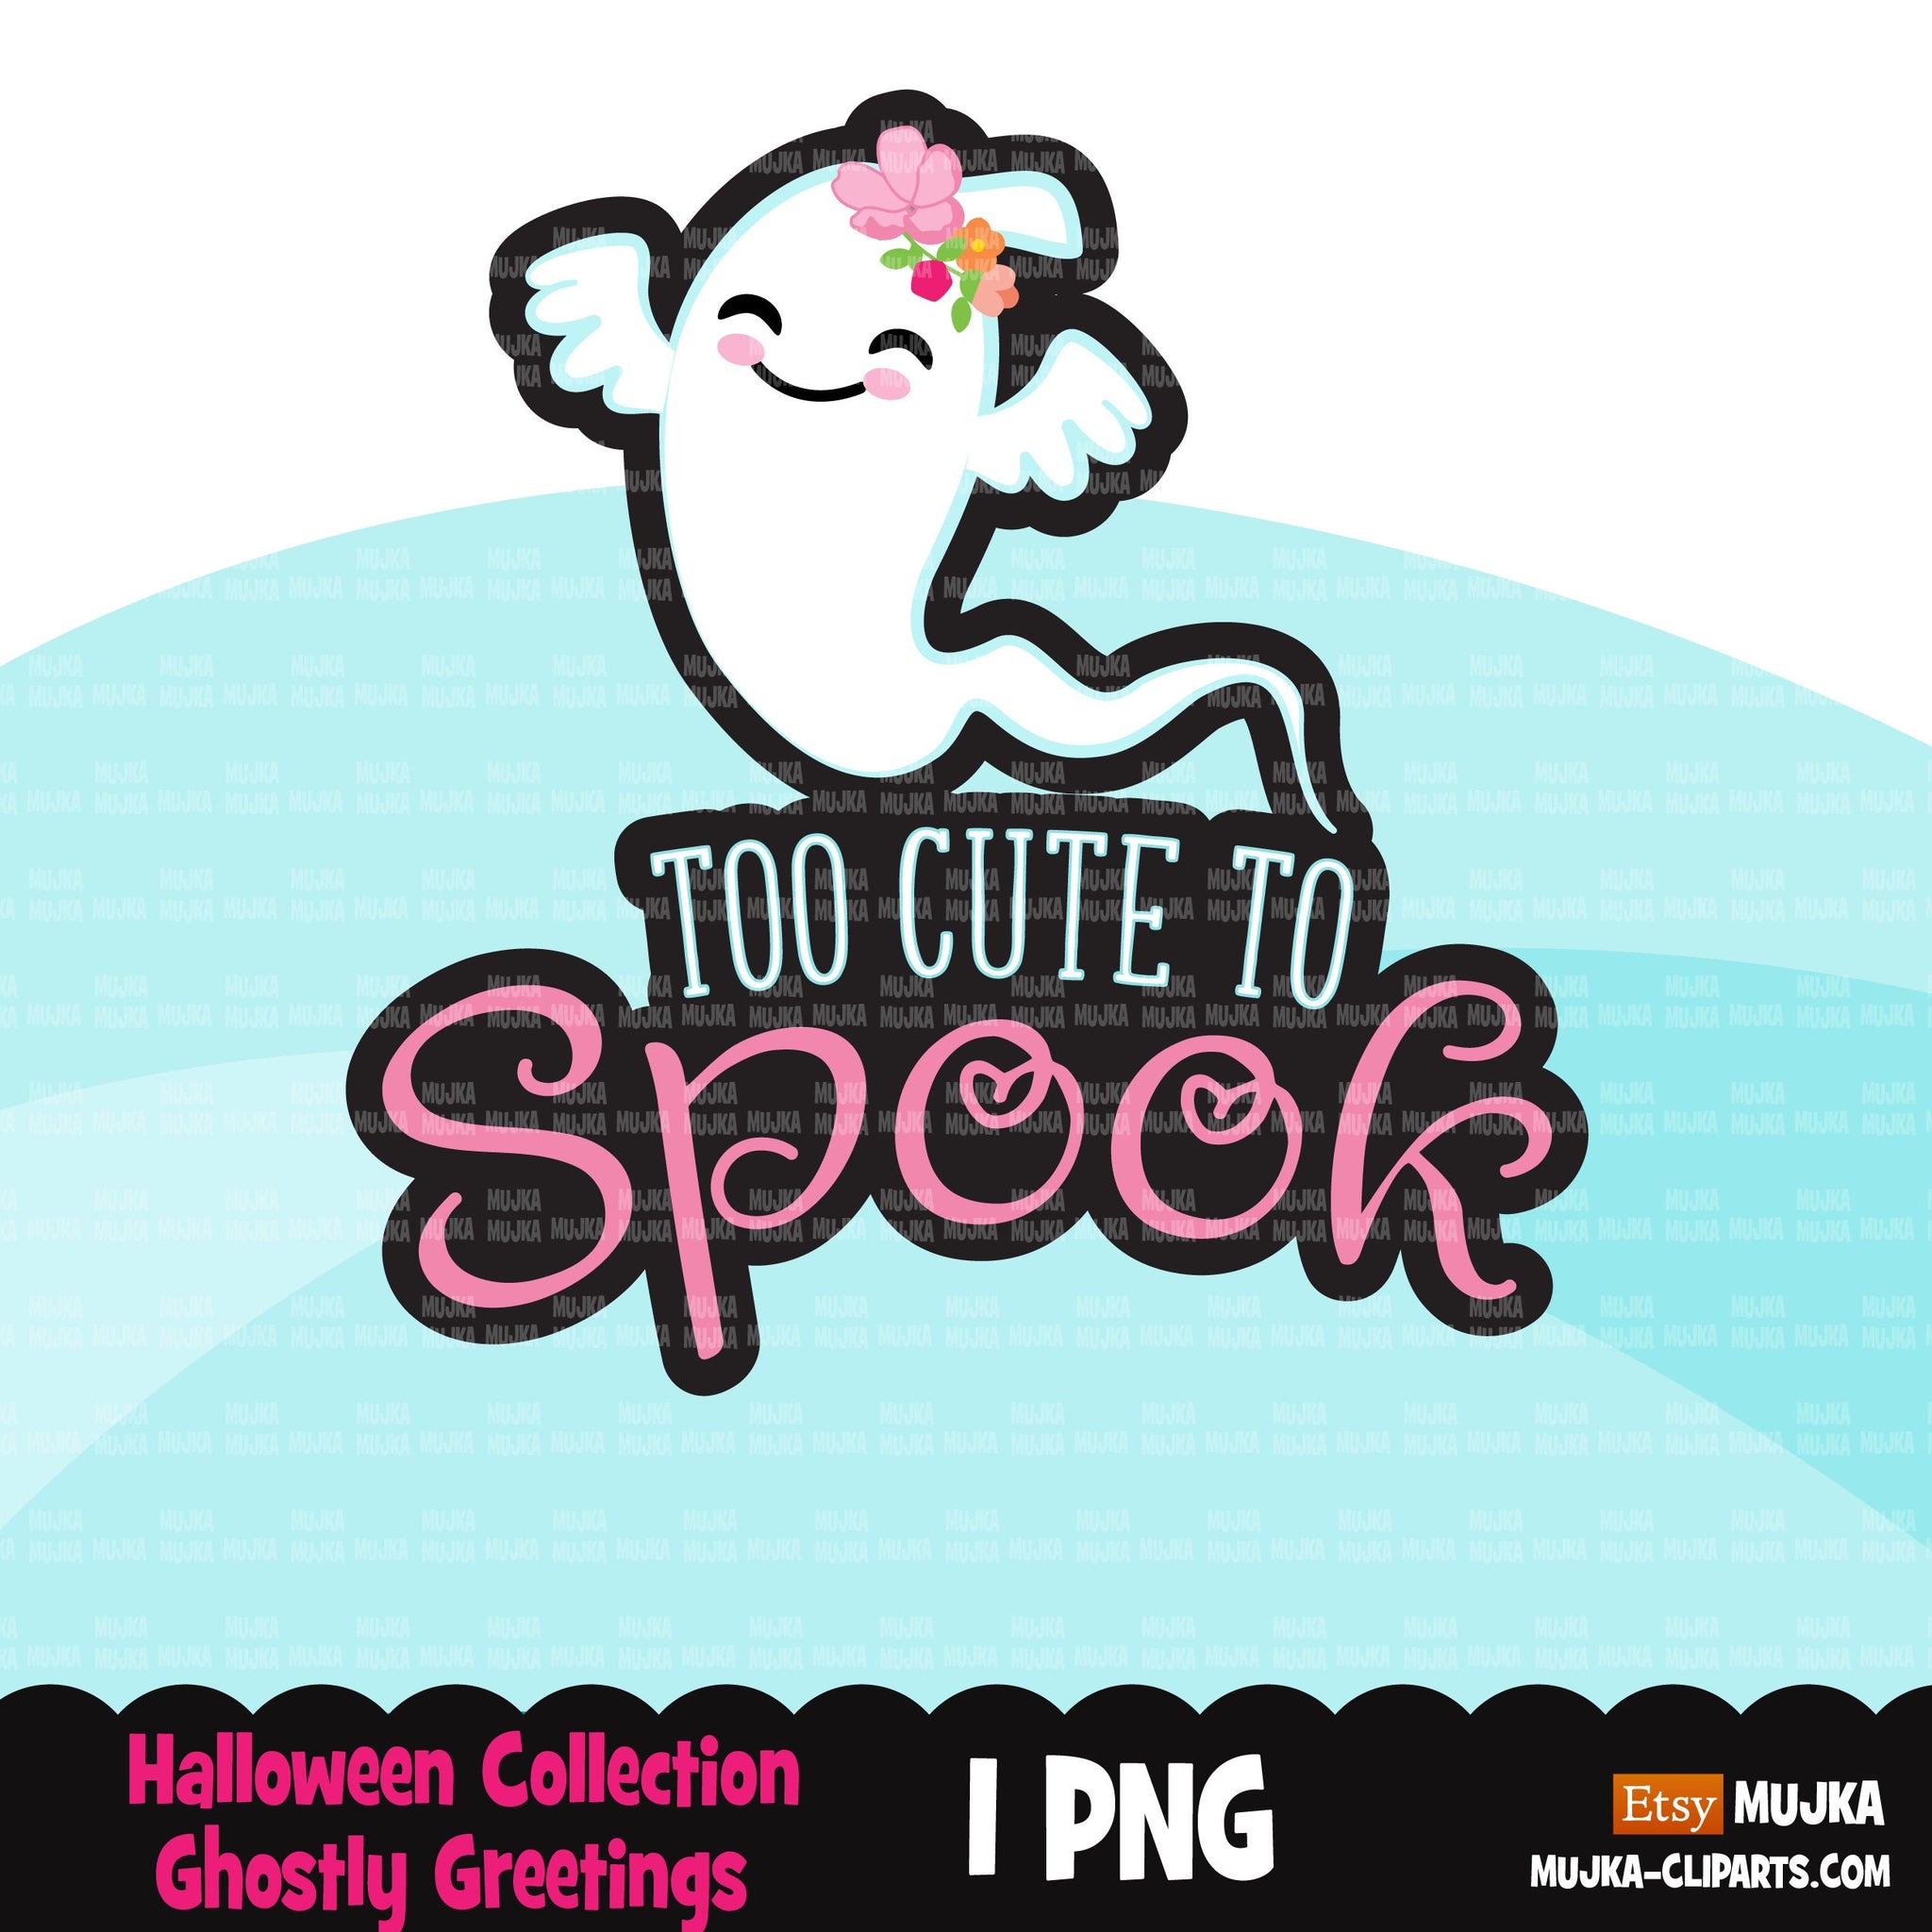 Too cute to spook png, Halloween clipart, ghost clipart, Halloween sublimation designs digital download, cute ghost png, baby girl shirt